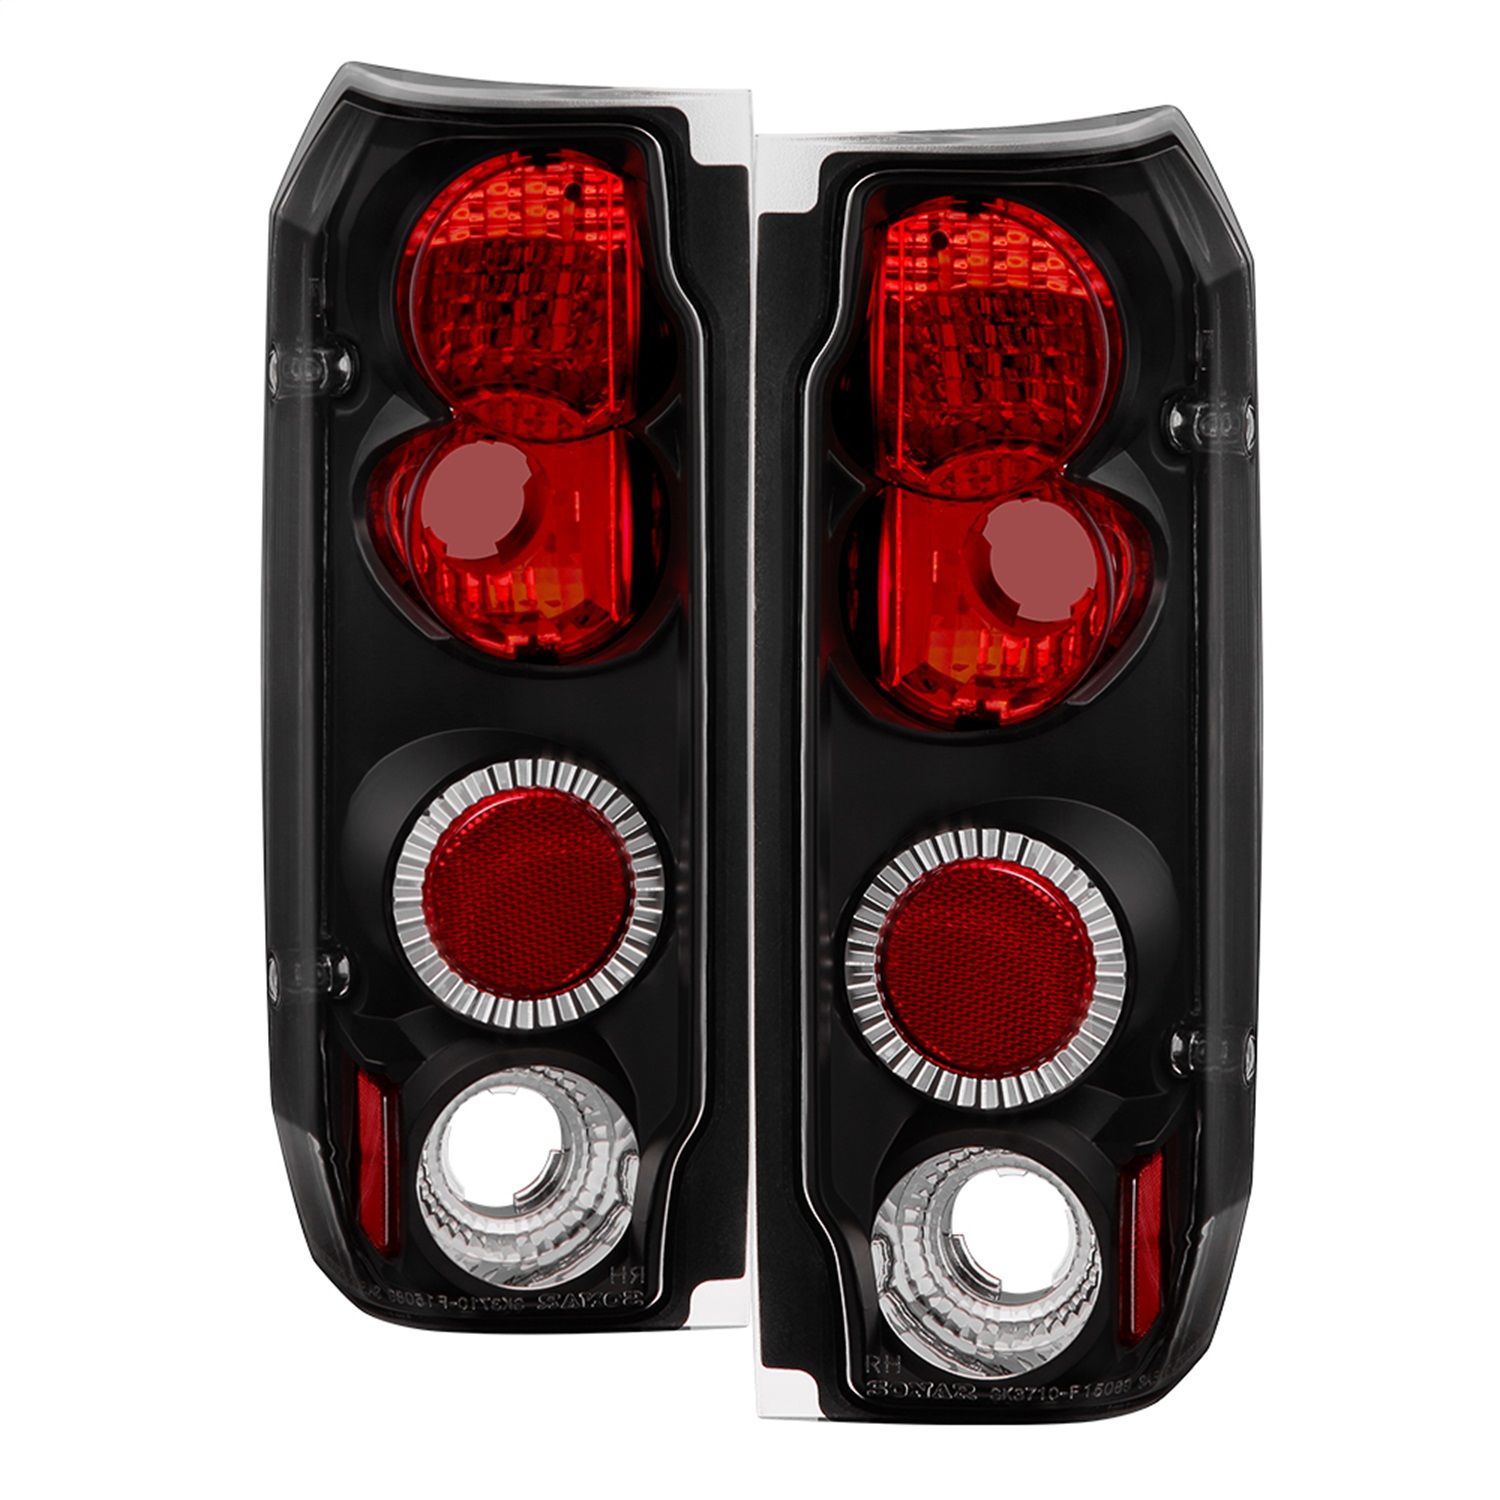 Spyder Auto 5003300 Euro Style Tail Lights Fits 87-96 Bronco F-150